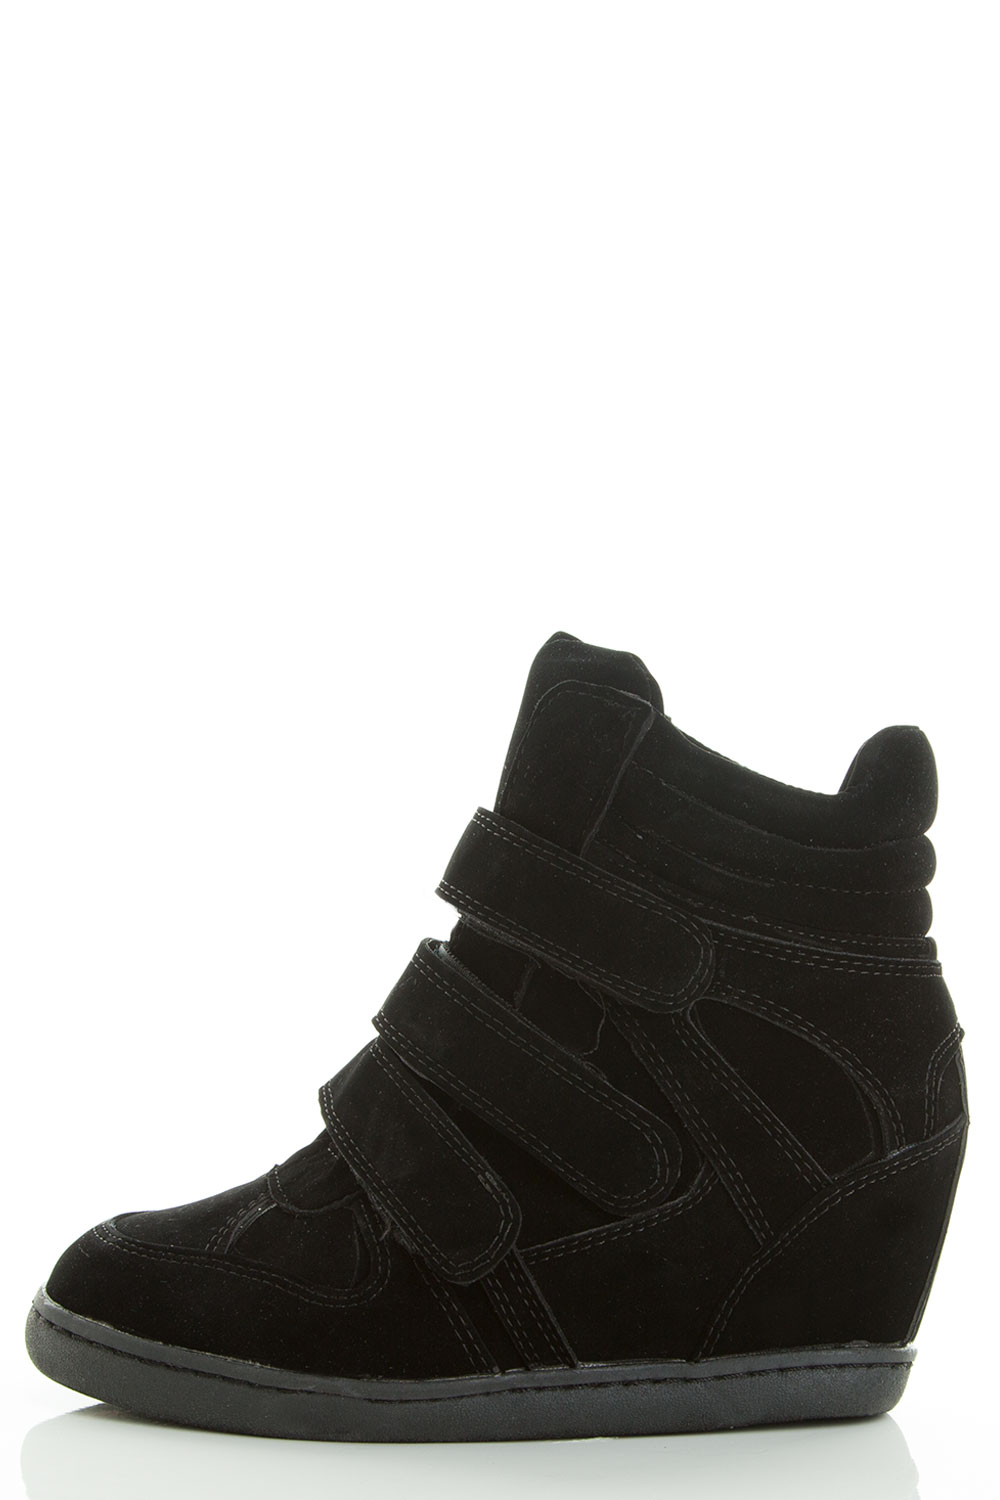 Velcro Strap Round Toe Hidden Wedge Ankle Booties